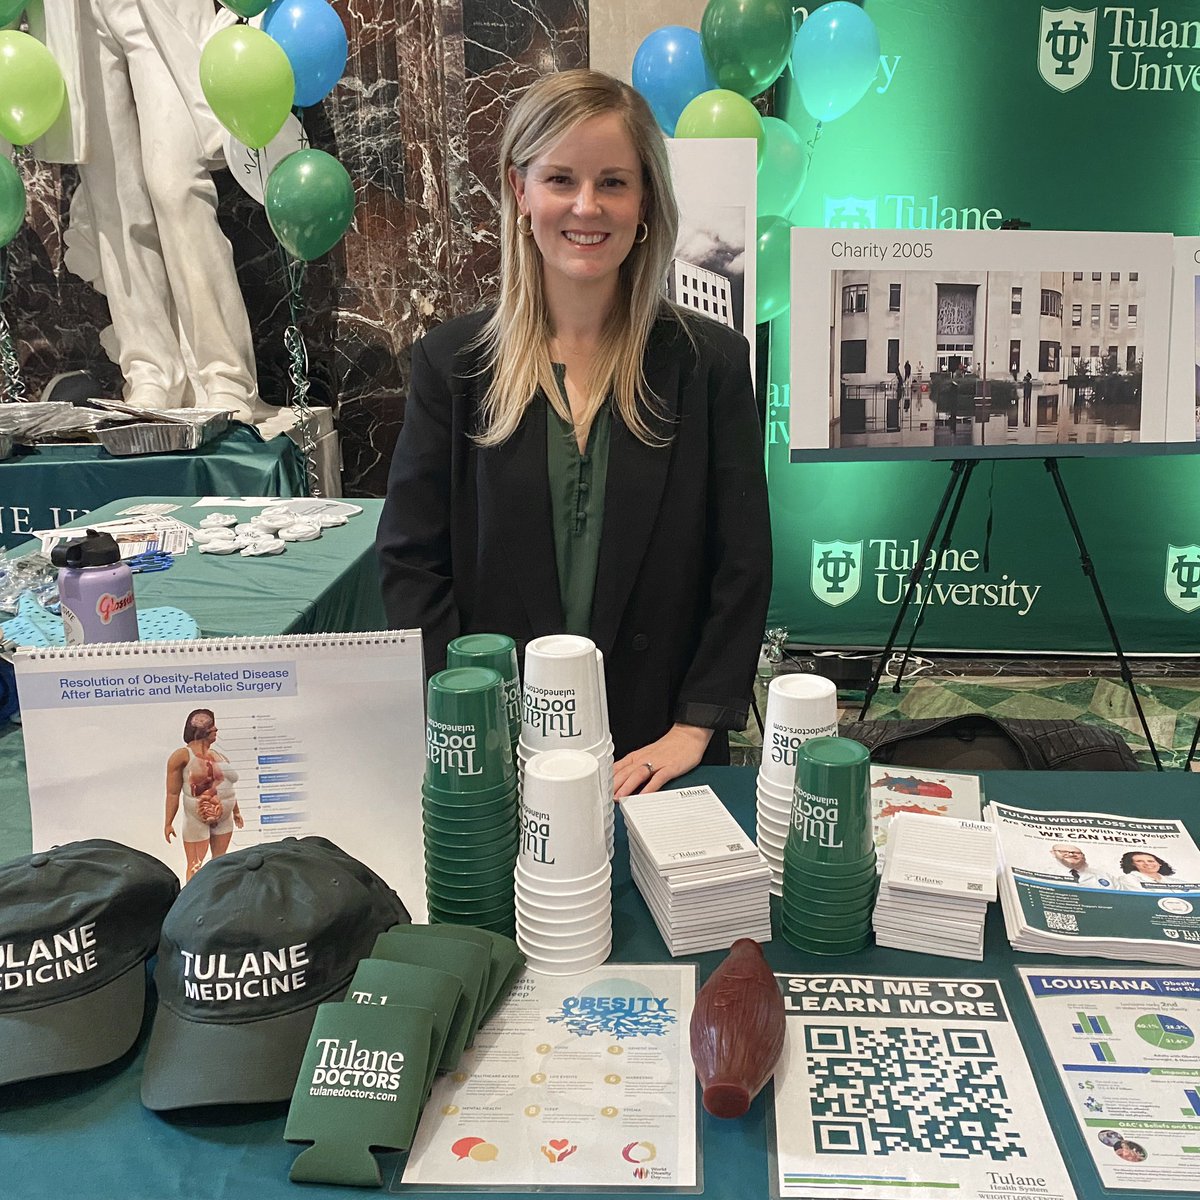 Last week we celebrated #TulaneDay at the Capitol! Our community was honored to share Tulane’s impact with Louisiana’s leaders and mark 10 years of leadership. Special thanks to our students and supporters for bringing the #GreenWave spirit to Baton Rouge! 💚 #TulaneDoctors